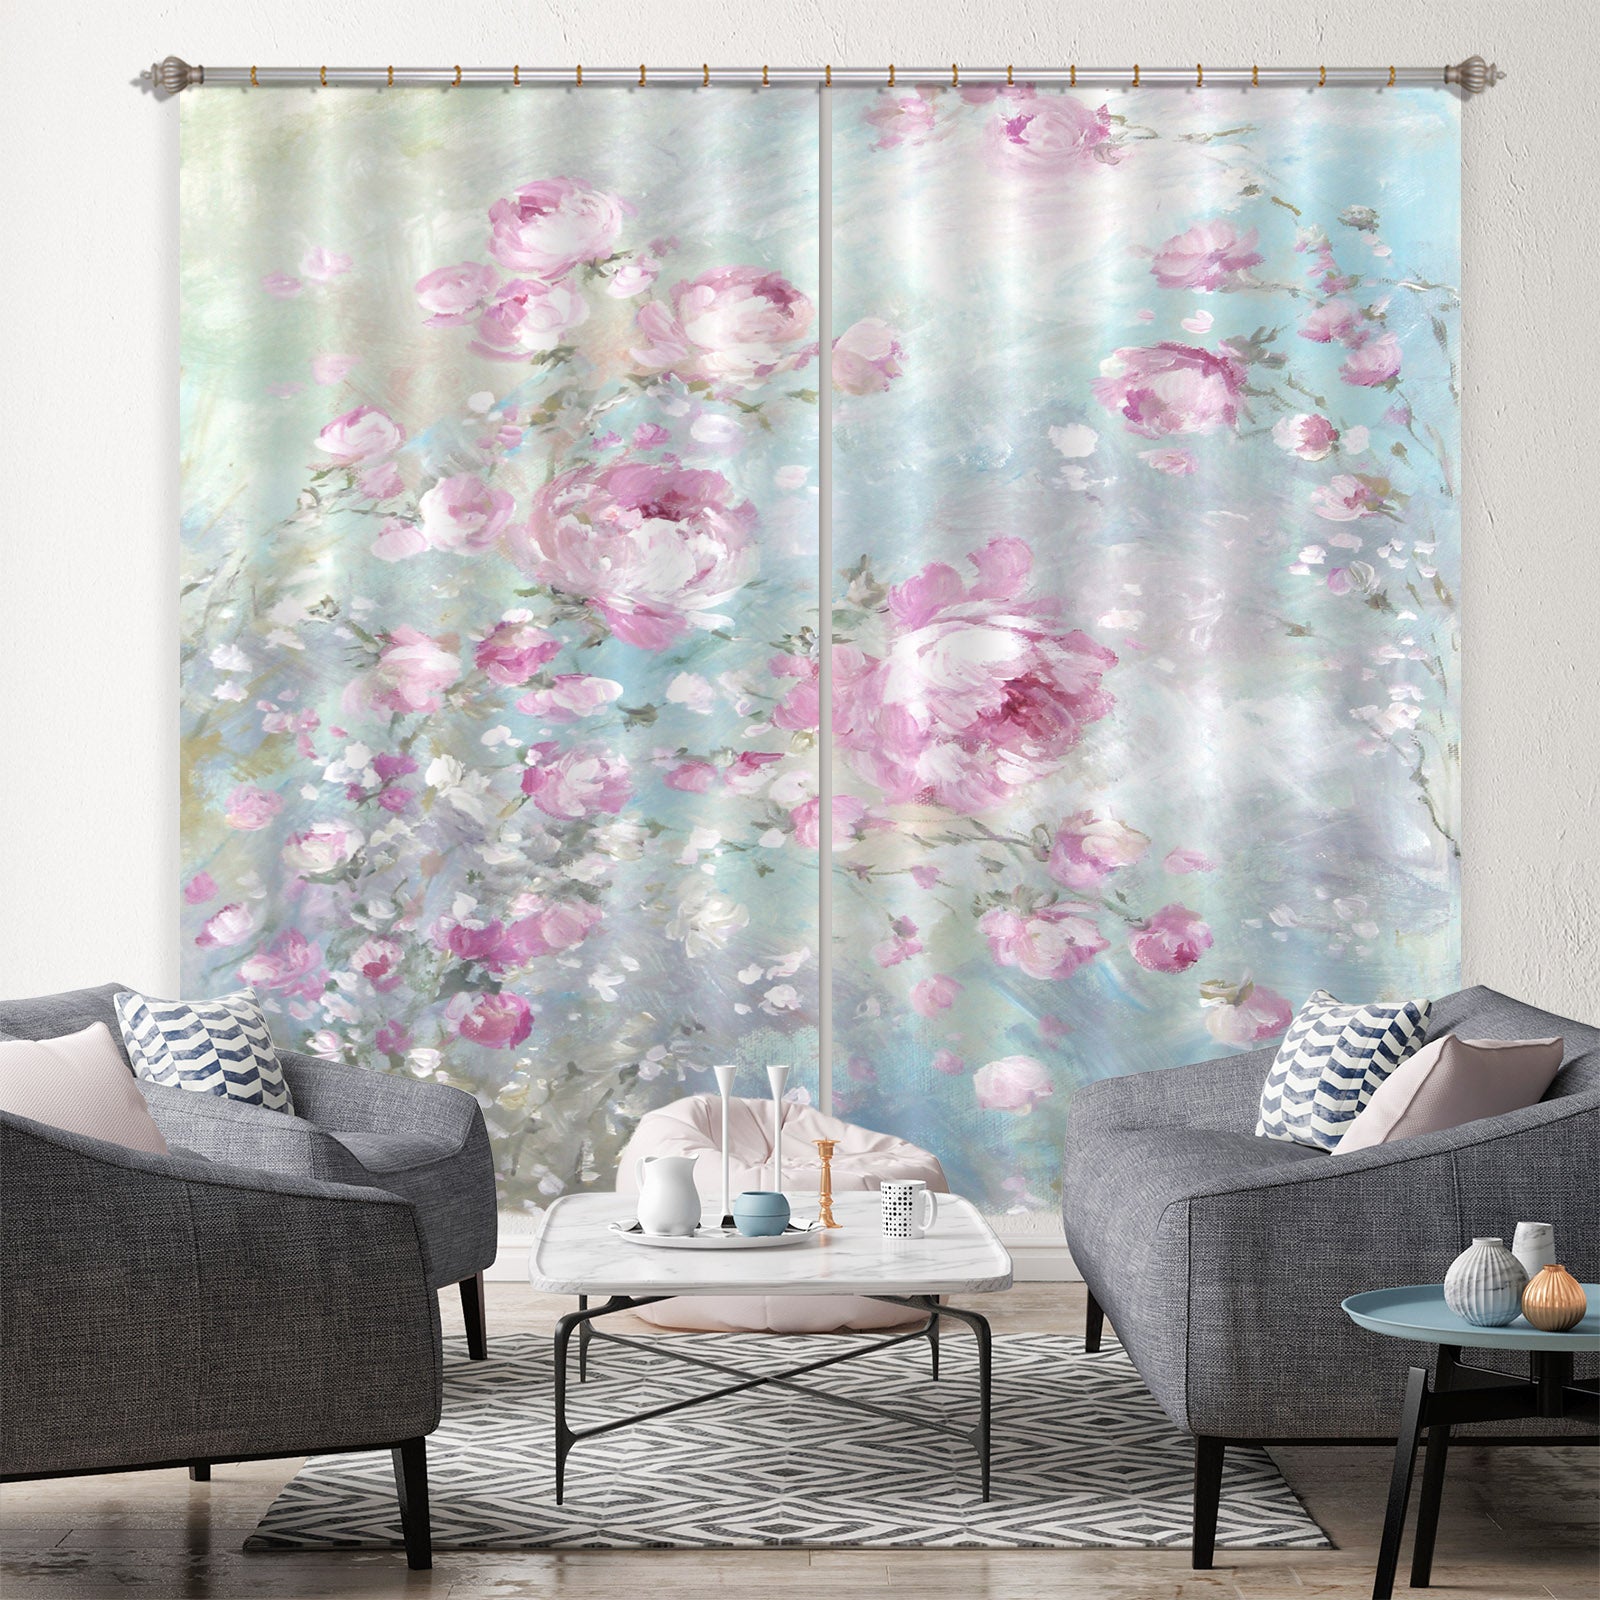 3D Pink Flowers 056 Debi Coules Curtain Curtains Drapes